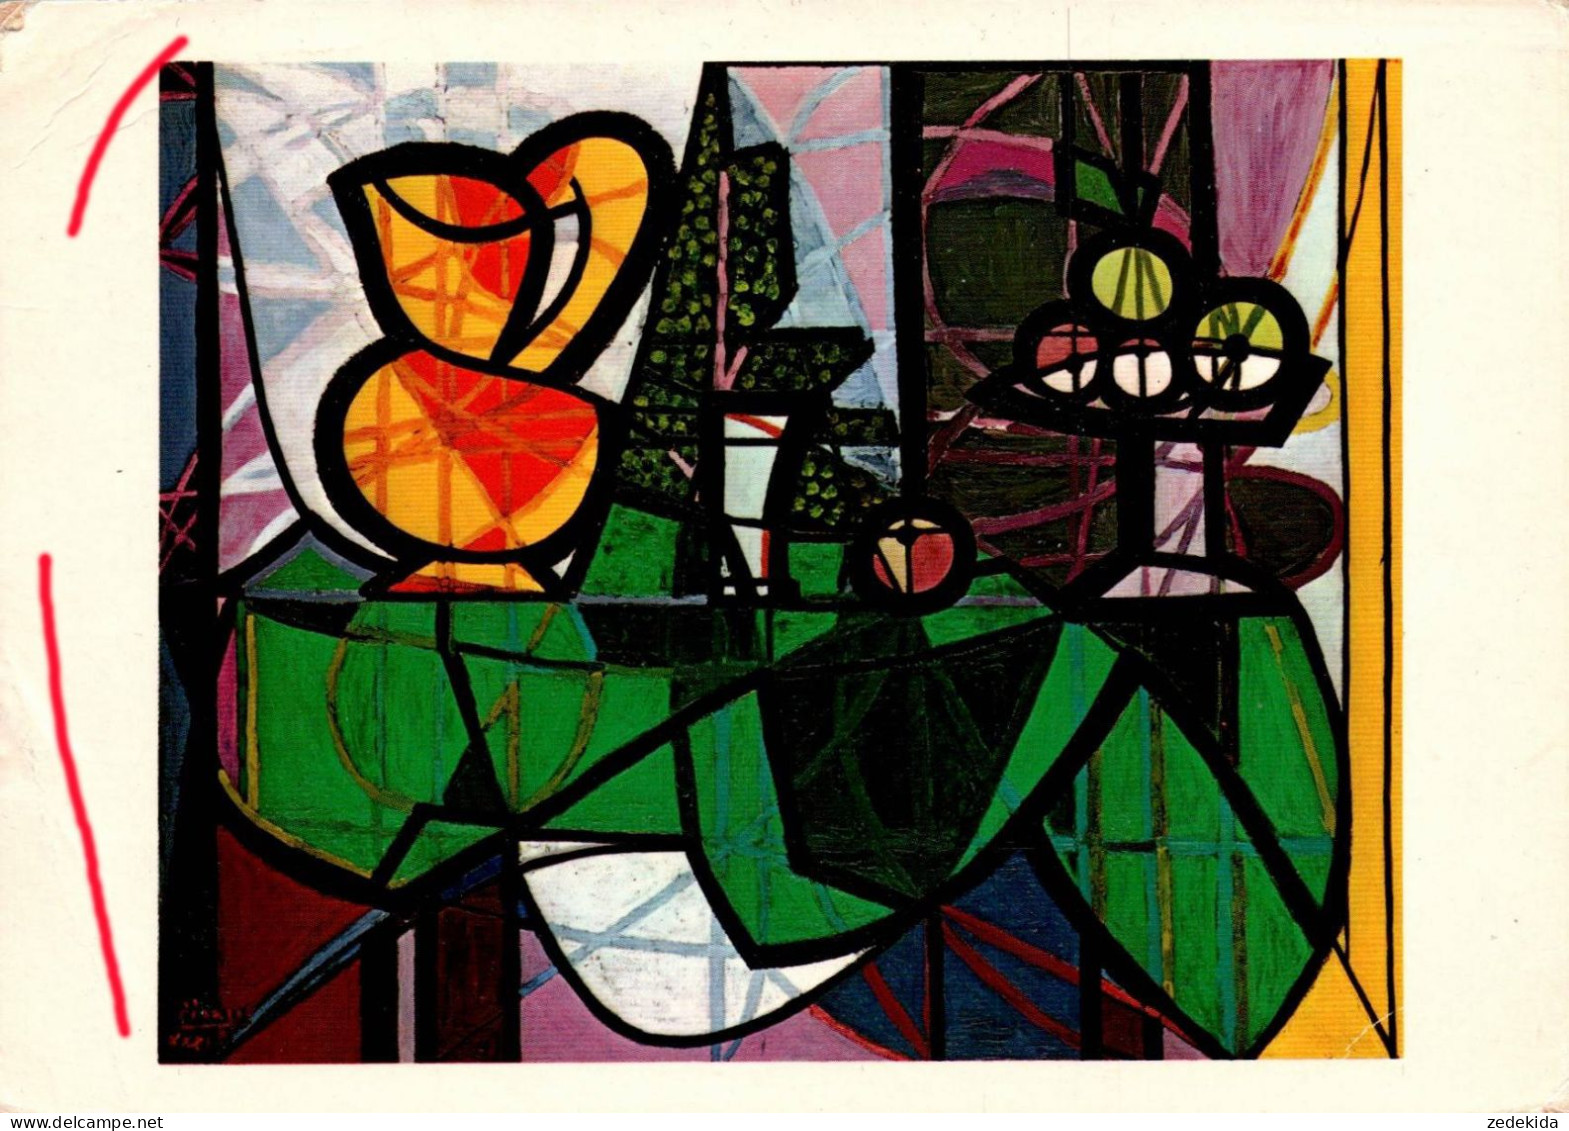 H1904 - Pablo Picasso Künstlerkarte - Picher And Bowl Of Fruit - Picasso